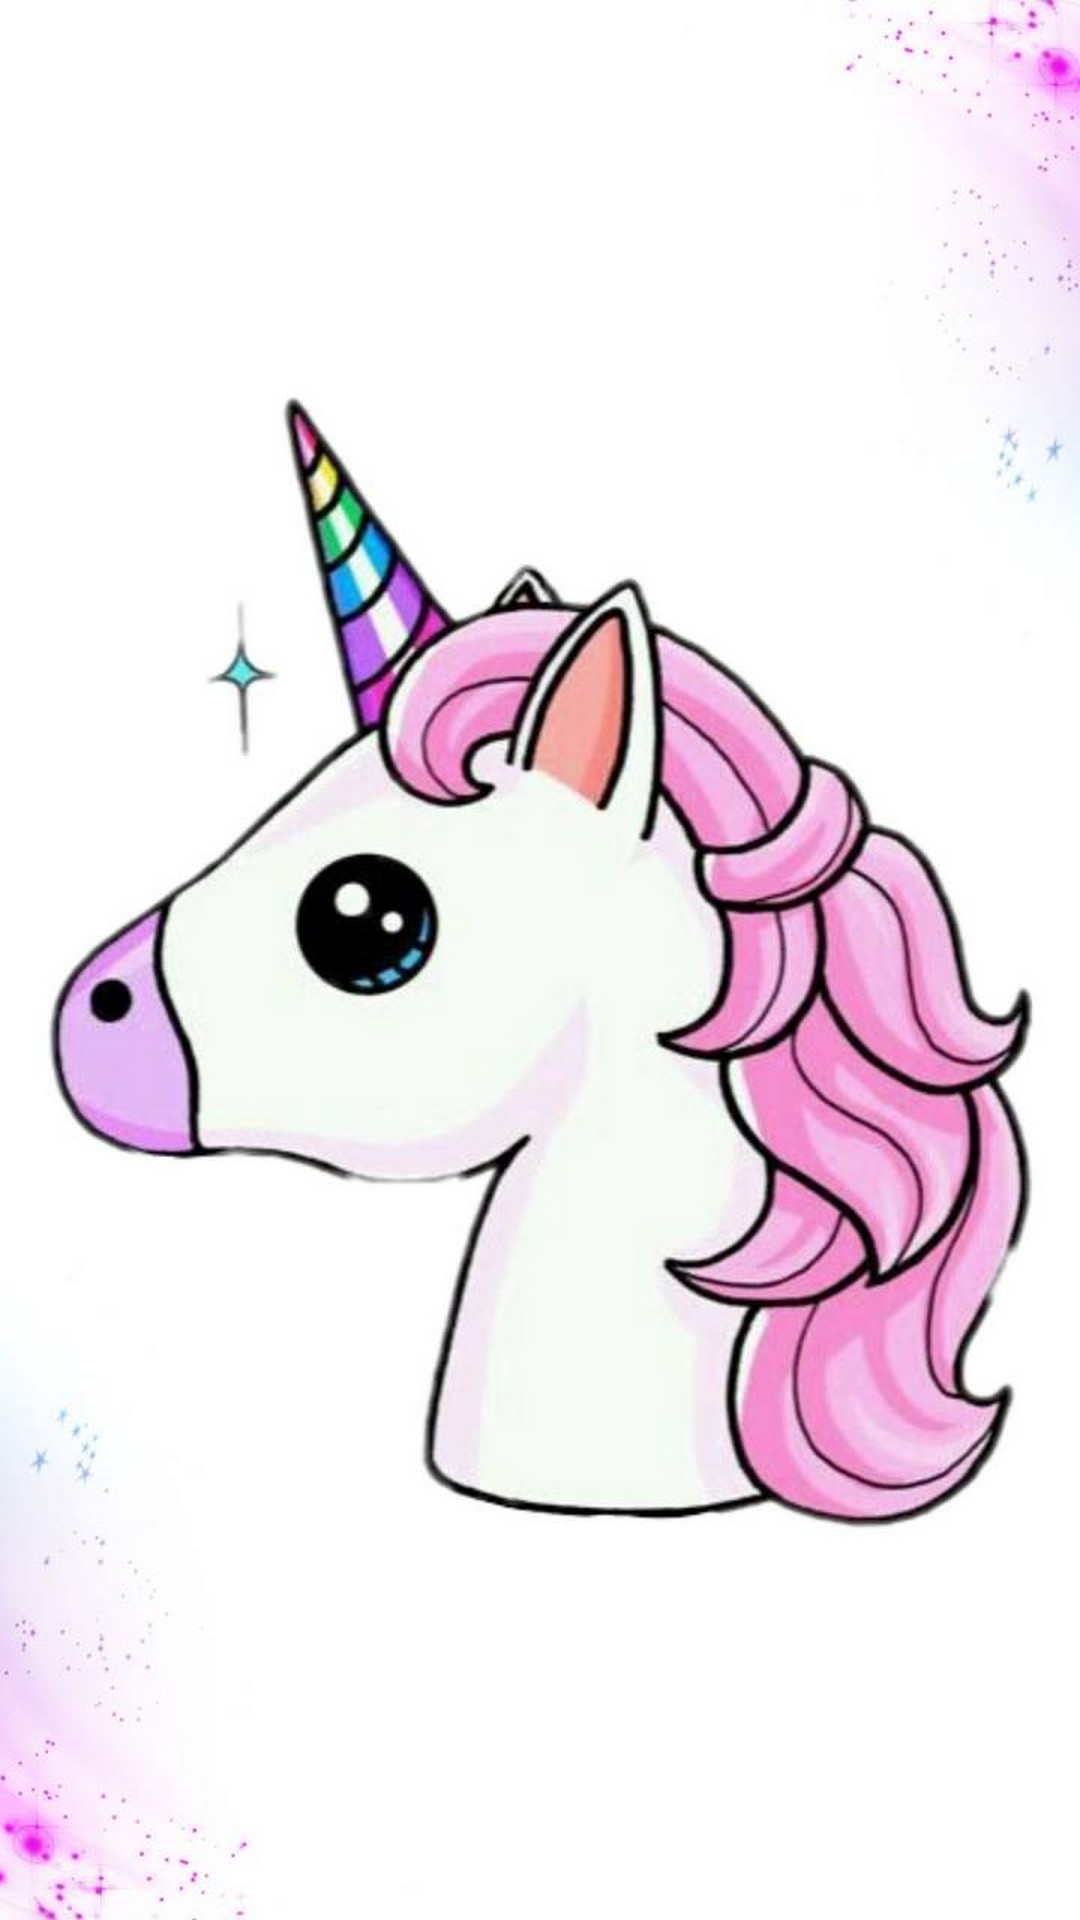 Wallpaper Android Cute Girly Unicorn With high-resolution 1080X1920 pixel. You can use this wallpaper for your Android backgrounds, Tablet, Samsung Screensavers, Mobile Phone Lock Screen and another Smartphones device